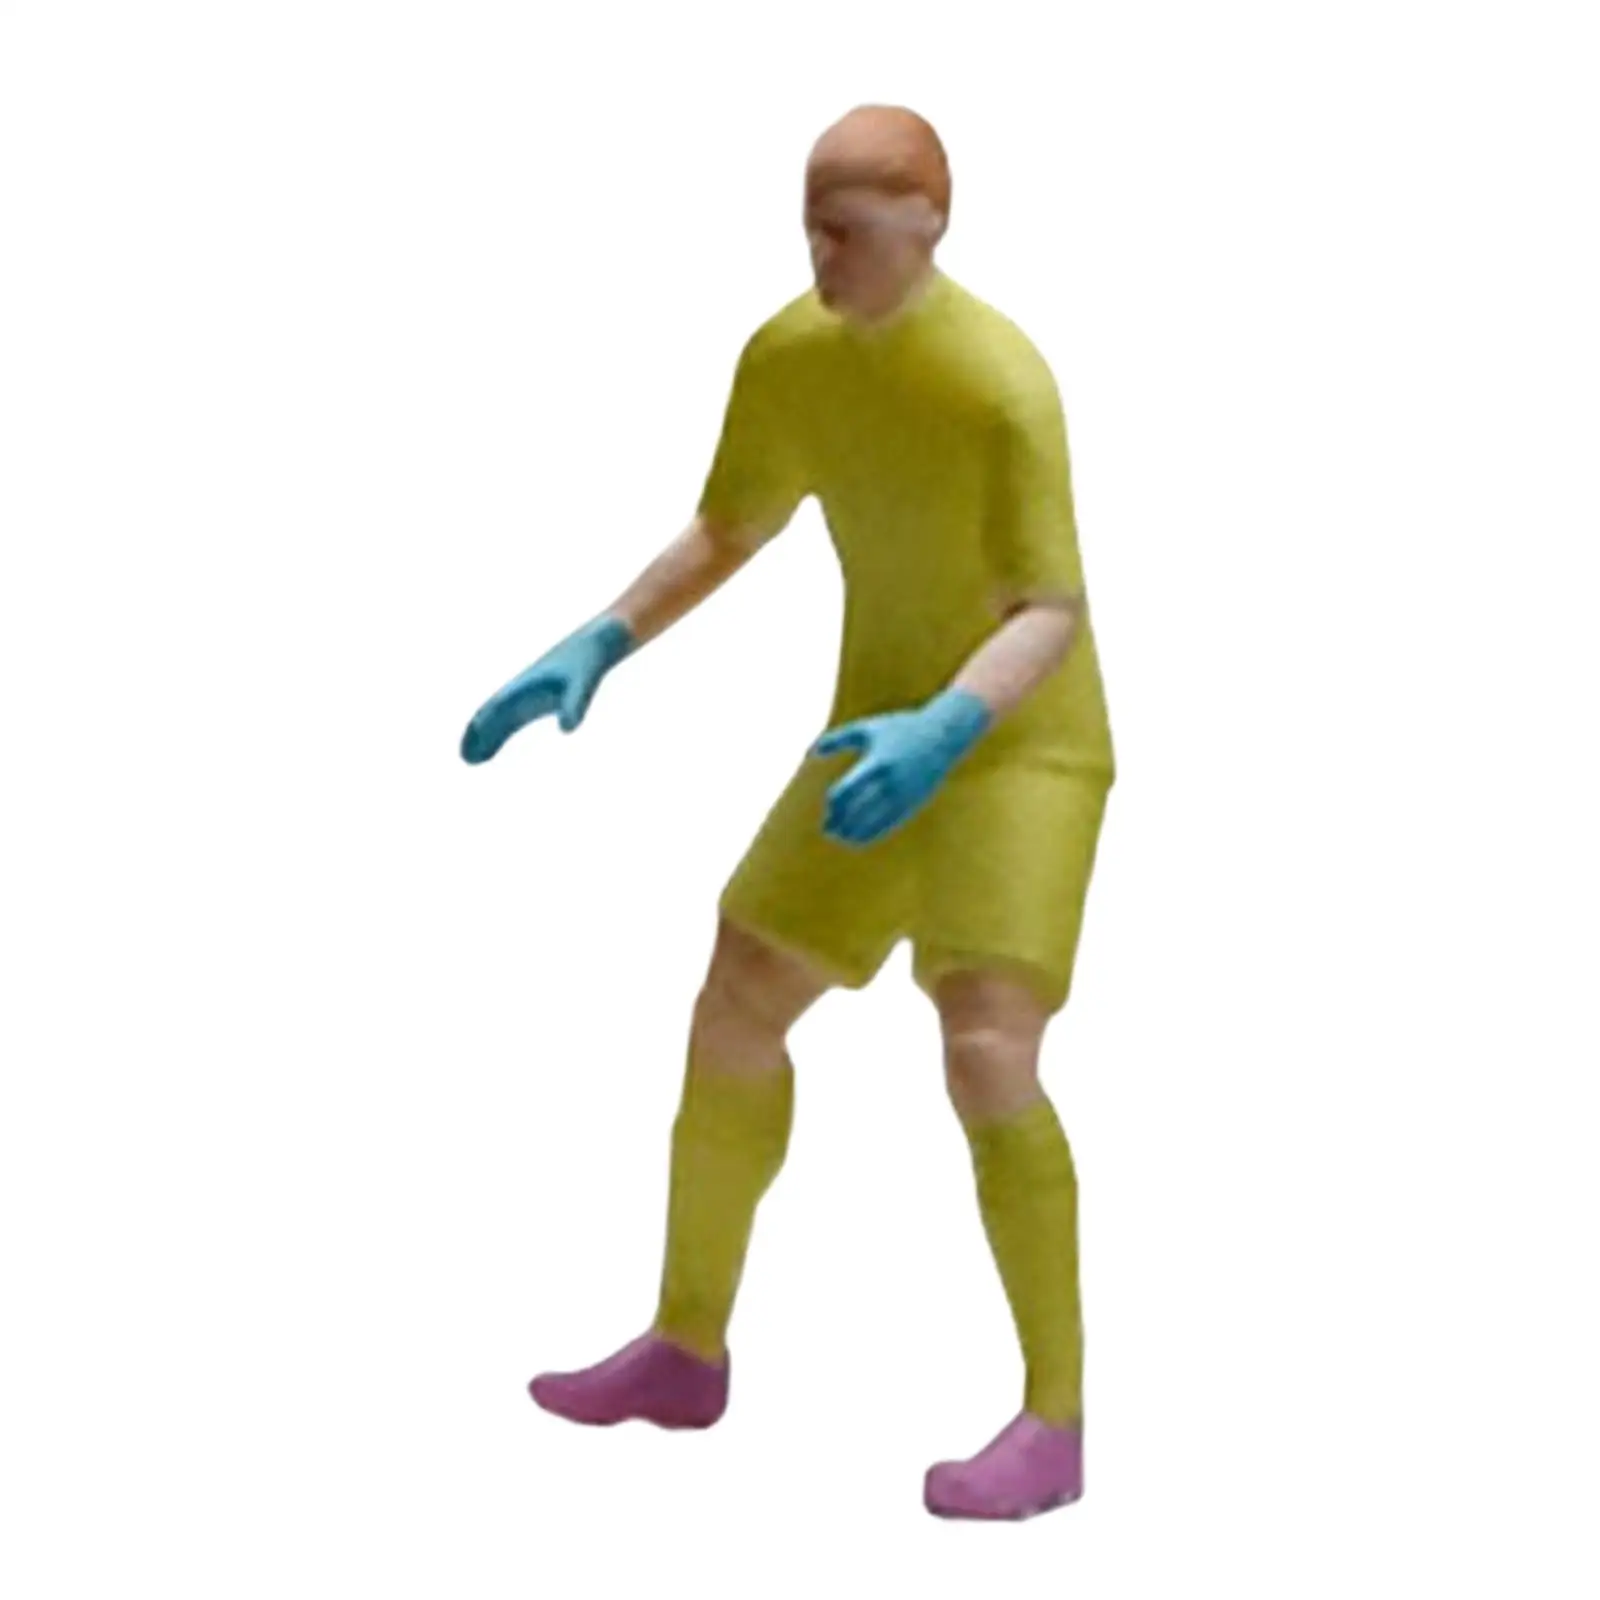 1/64 Scale Goalkeeper Decoration Desk Decoration Small Statue for Layout